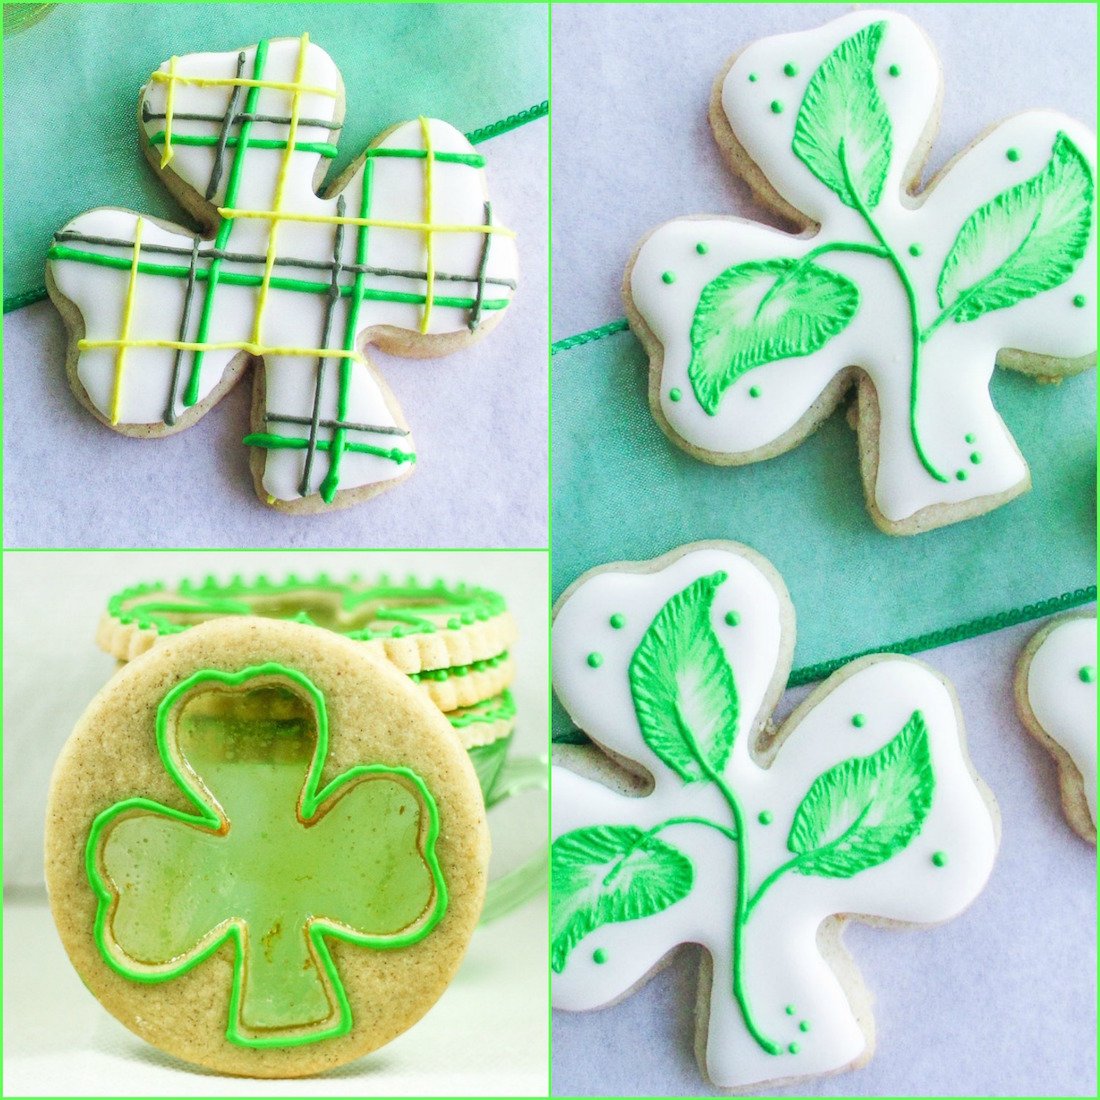 Shamrock shaped cookies decorated with royal icing.